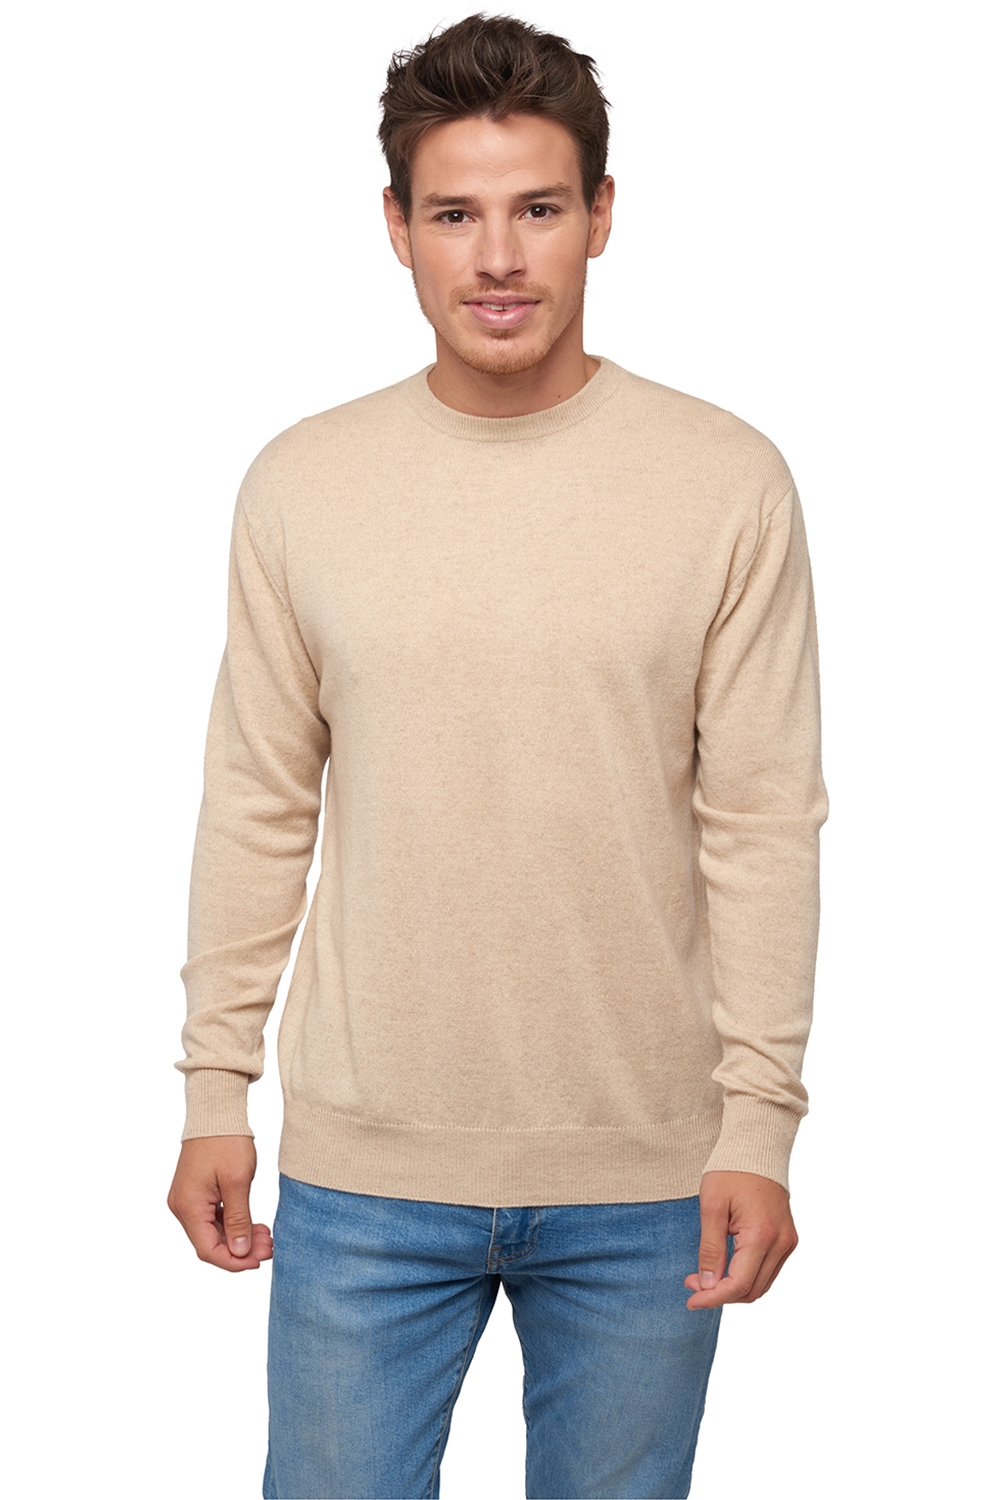 Cachemire Naturel pull homme col rond natural ness 4f natural beige 4xl